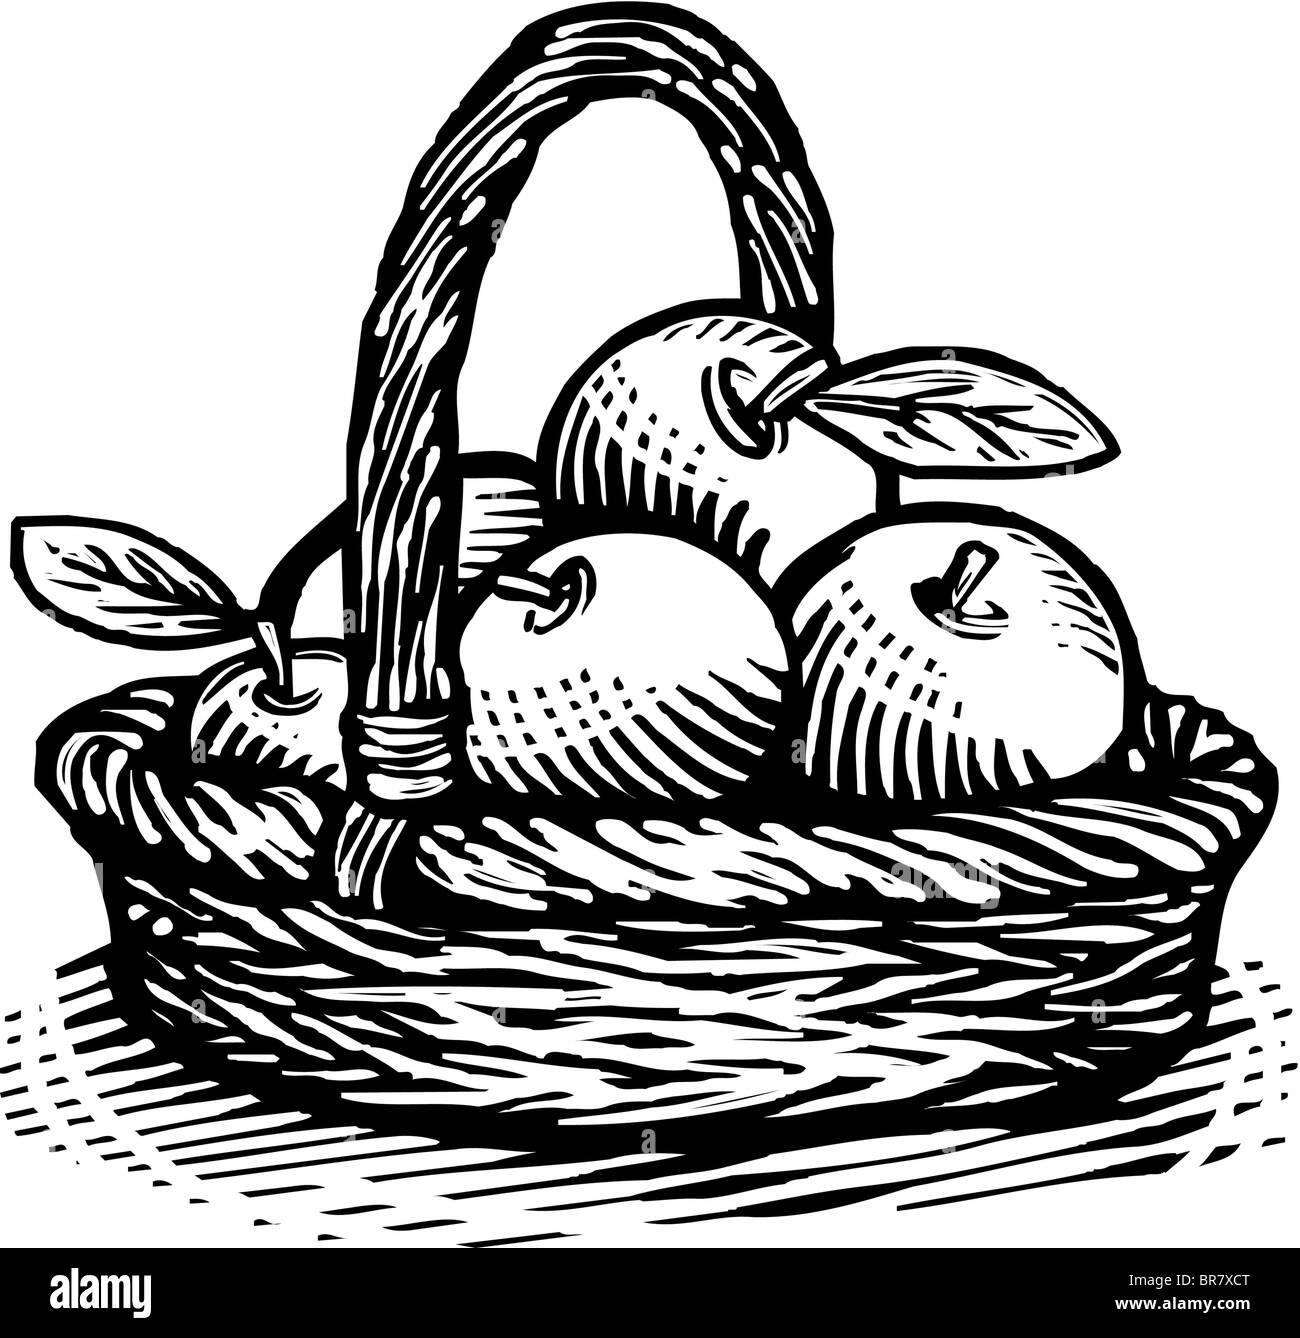 Drawing of a basket of apples drawn in black and white Stock Photo